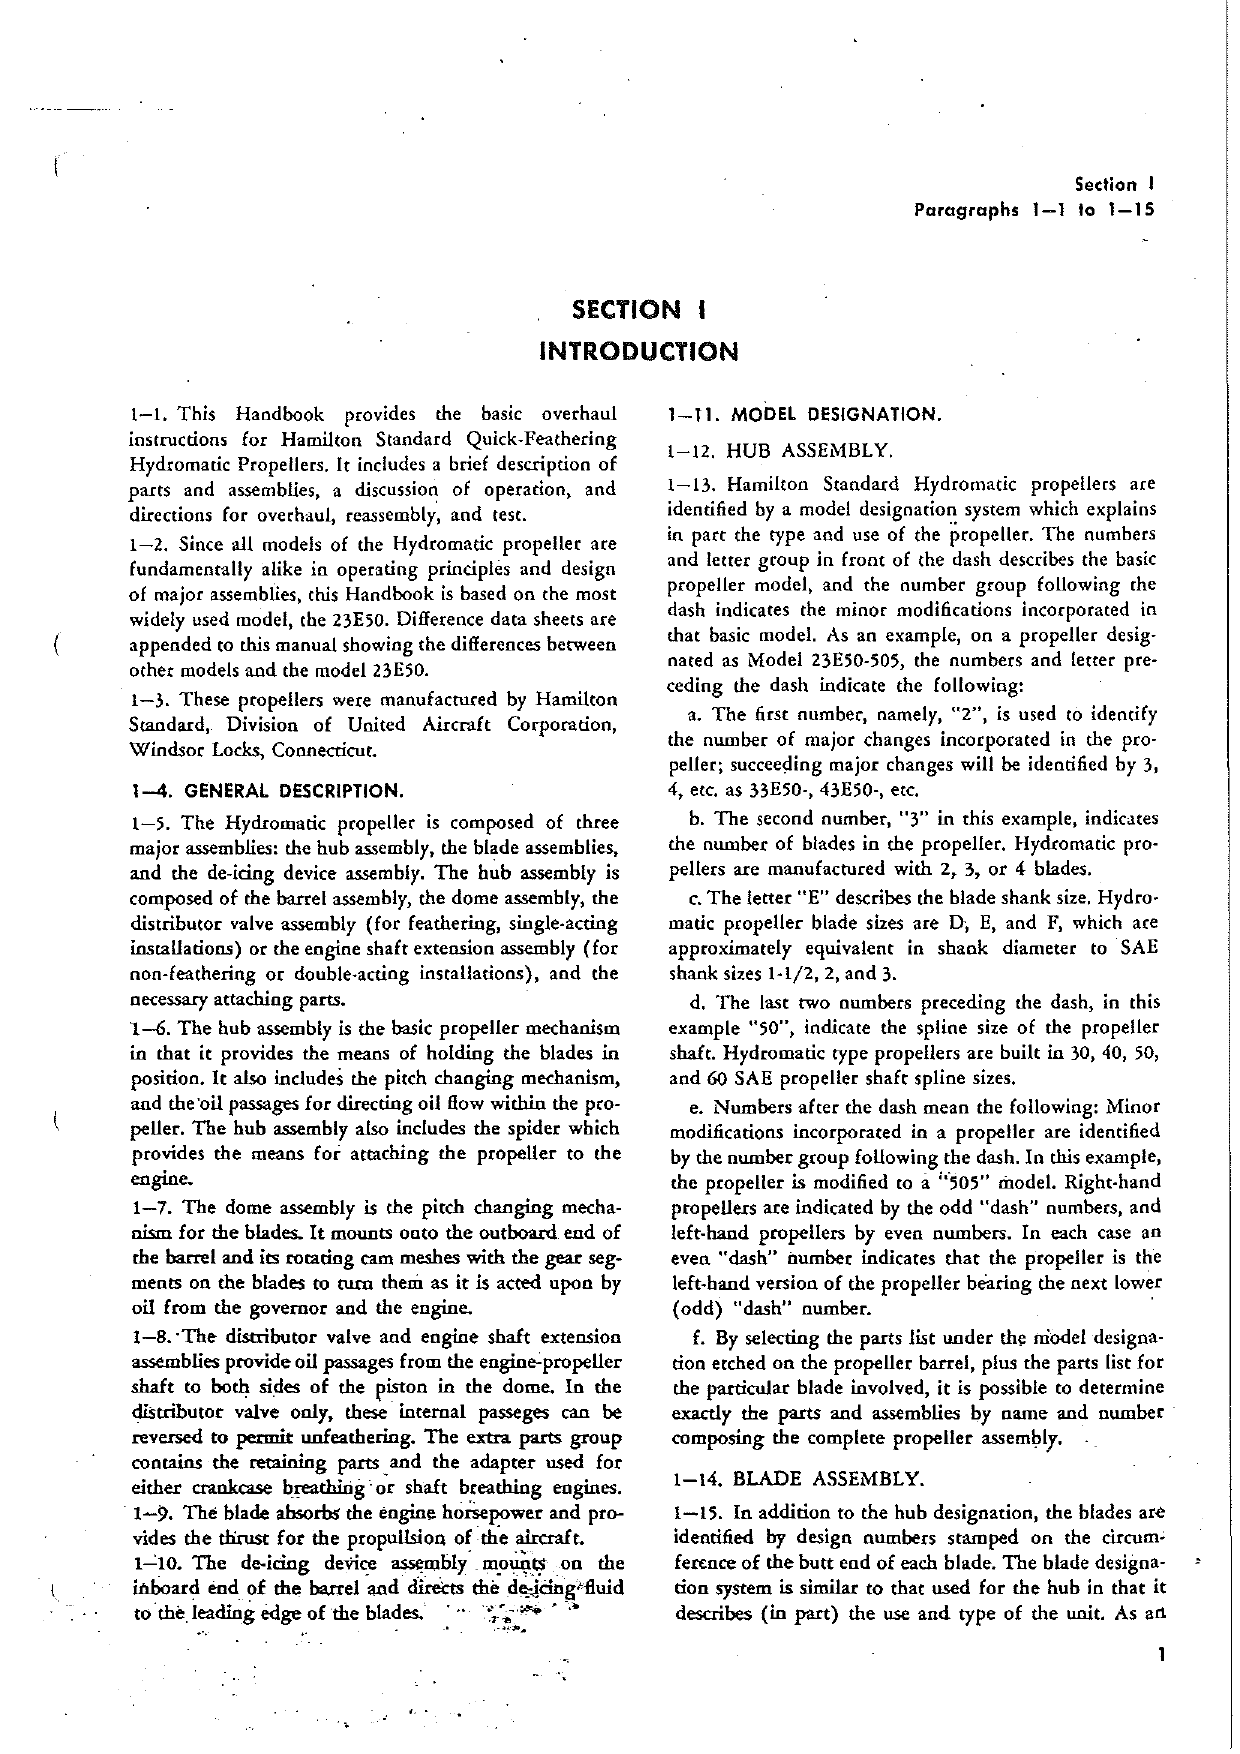 Sample page 5 from AirCorps Library document: Overhaul Manual for Hydromatic Propellers